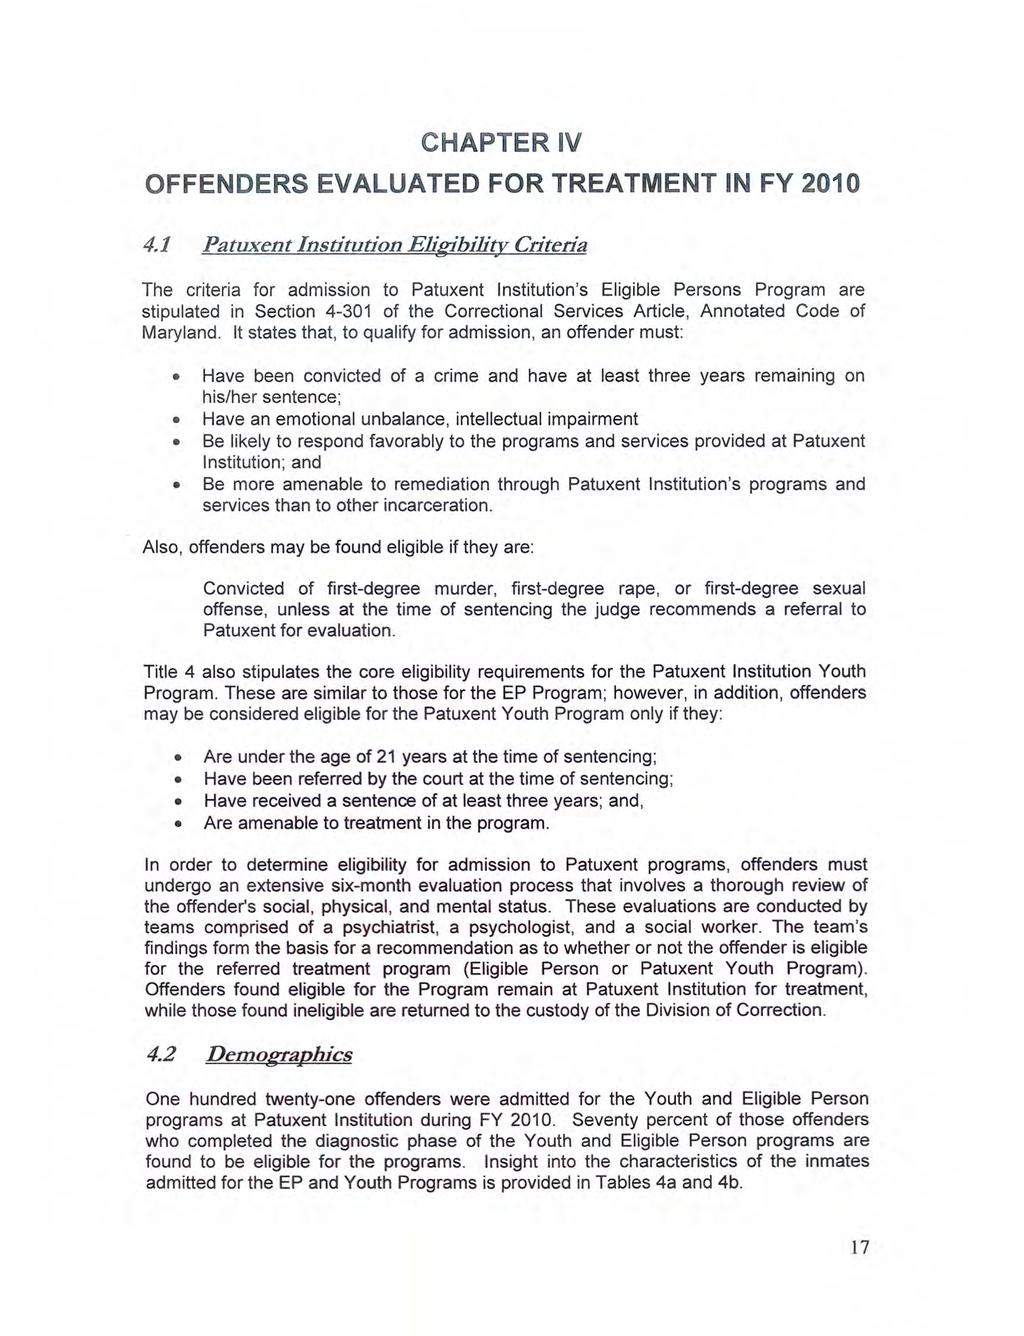 CHAPTER IV OFFENDERS EVALUATED FOR TREATMENT IN FY 2010 4.